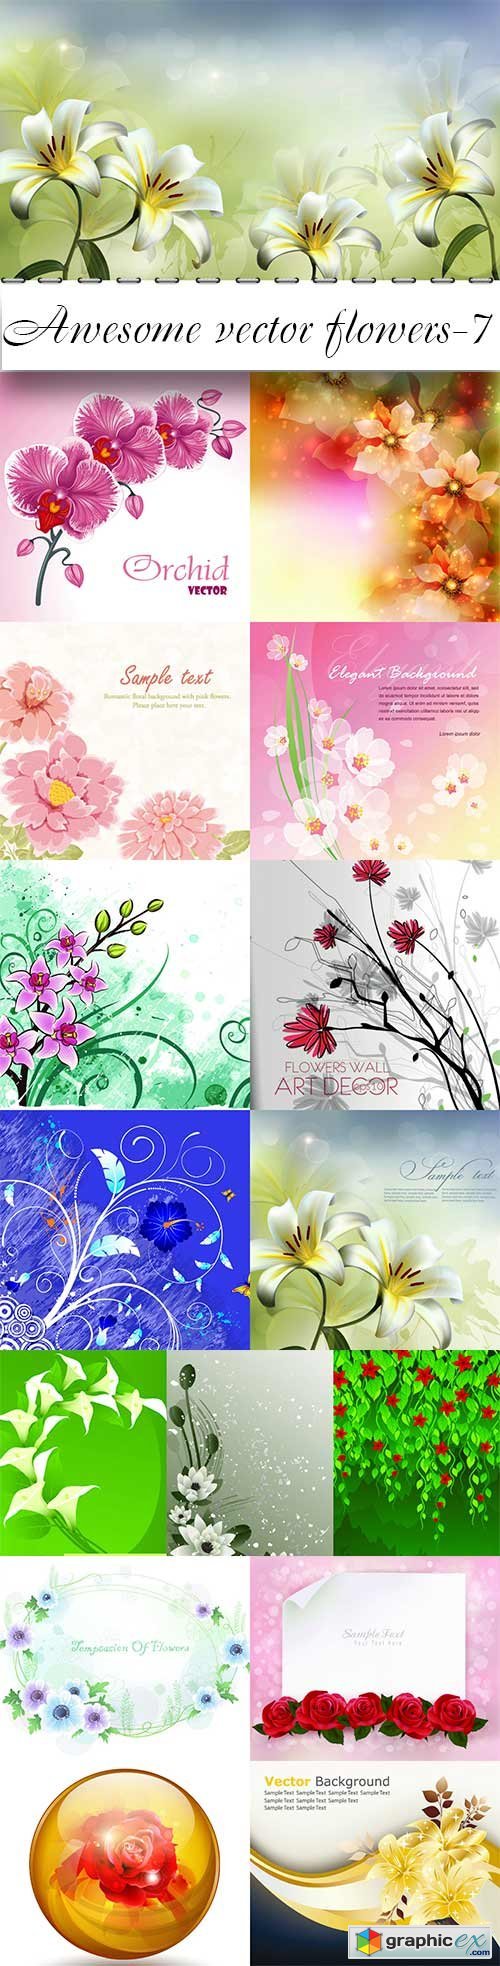 Awesome vector flowers-7